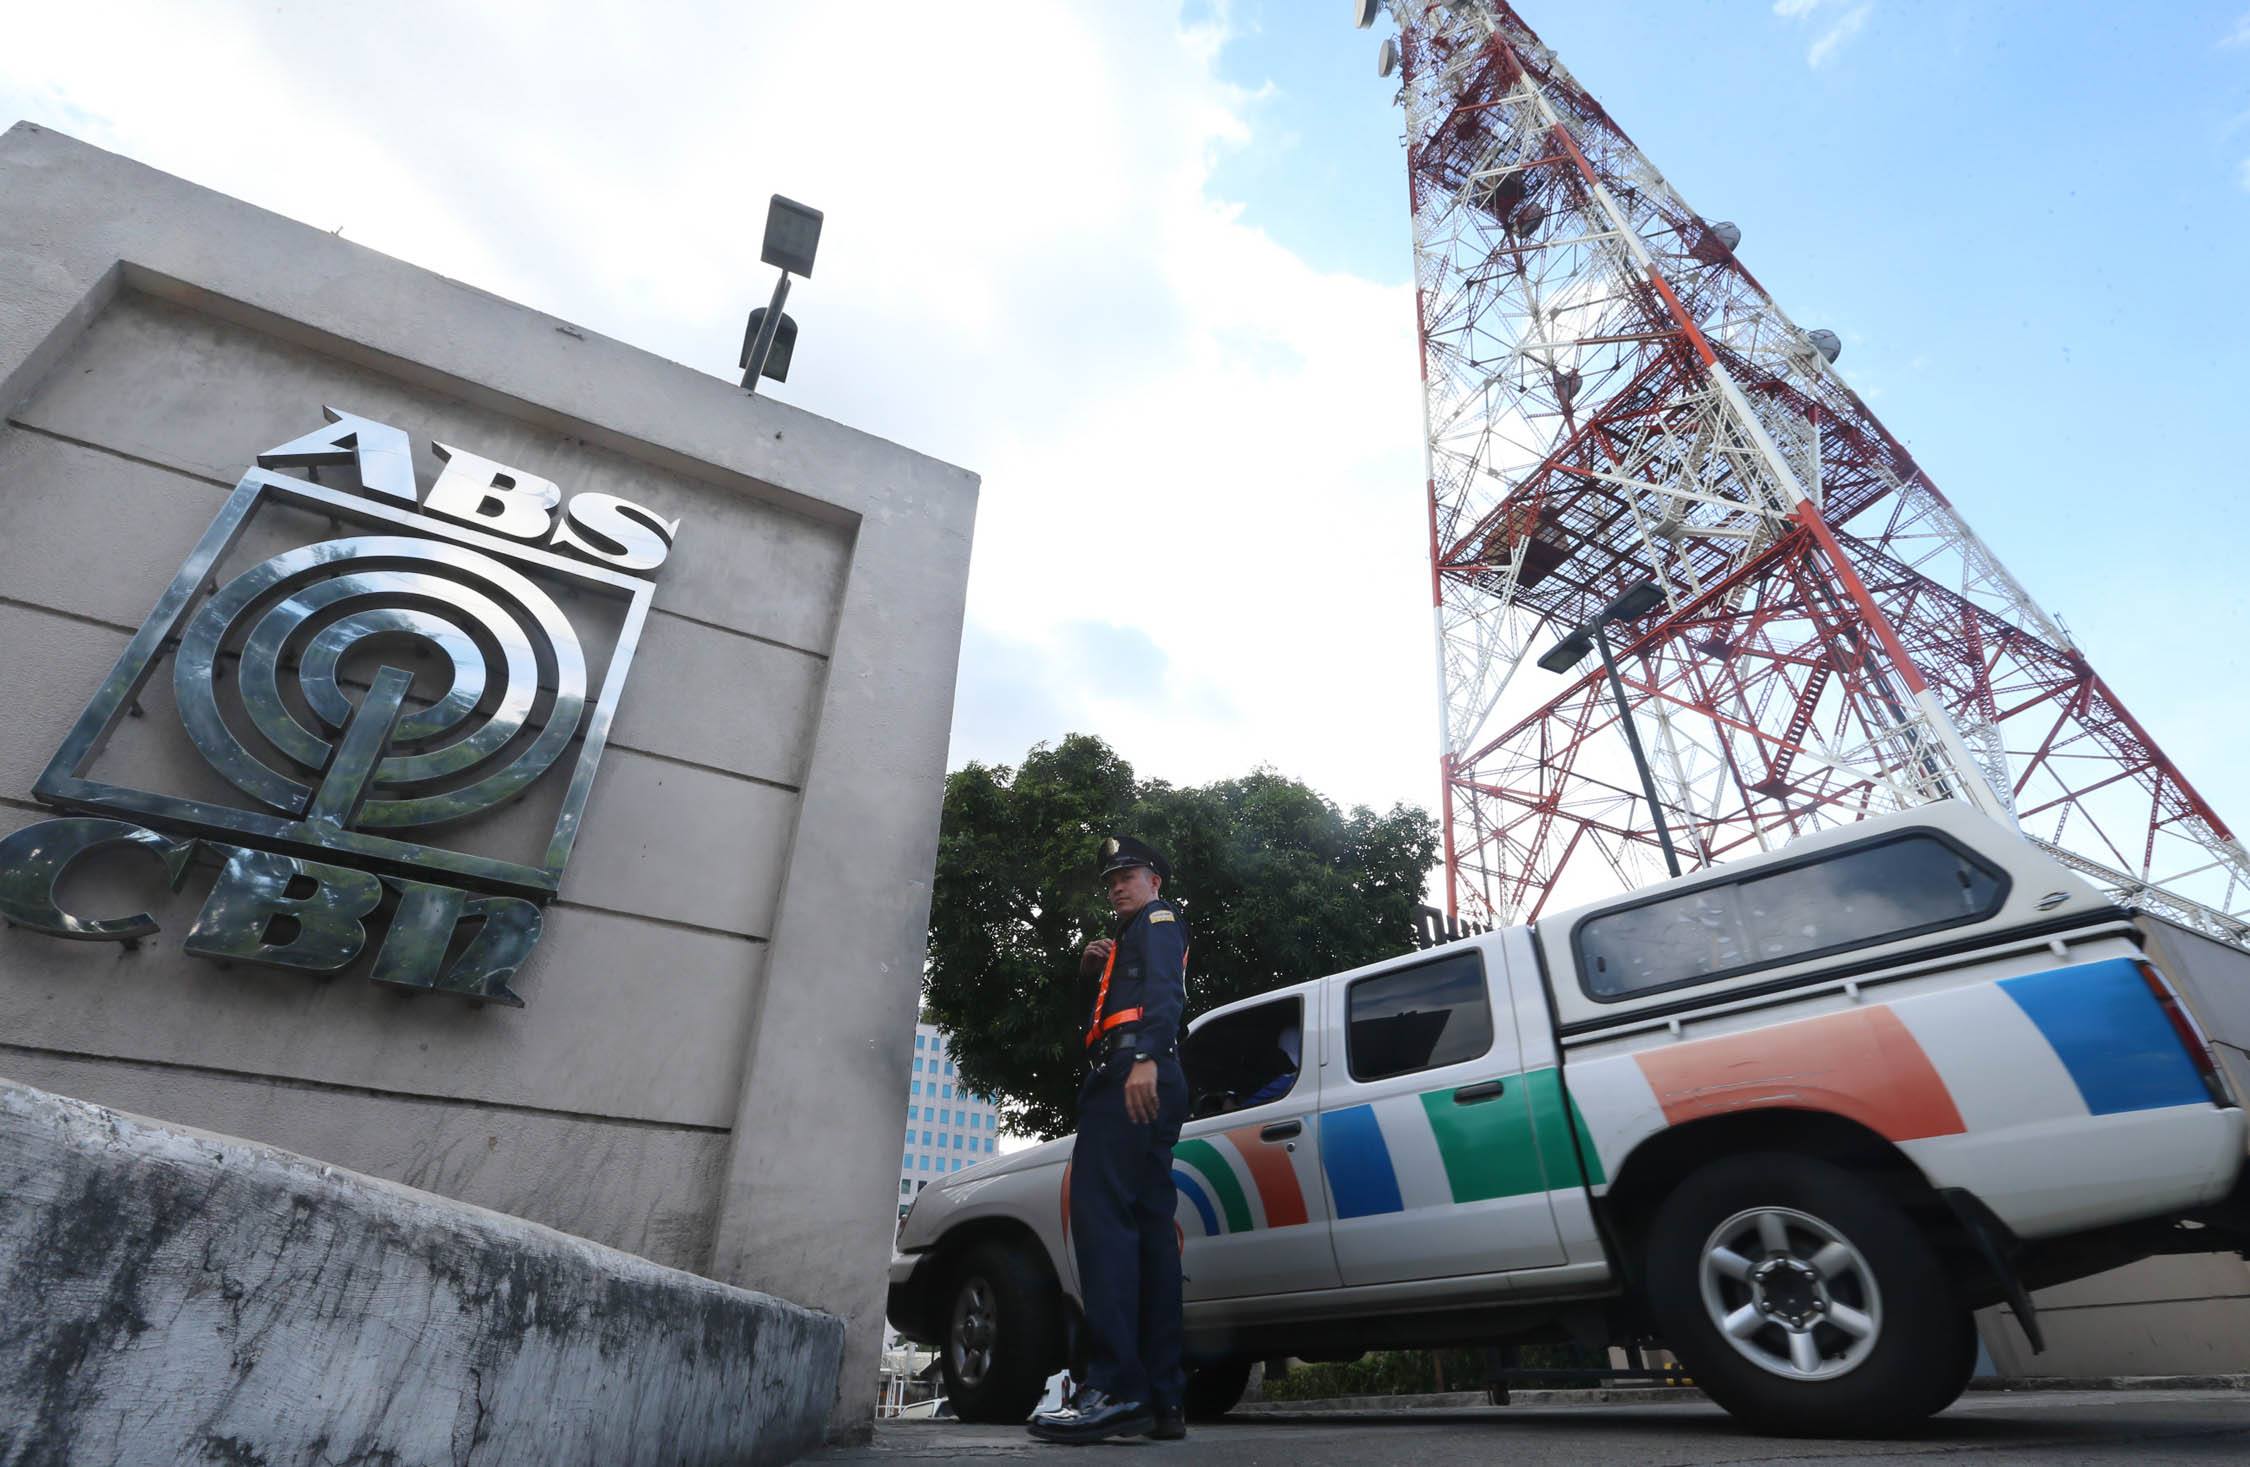 The National Telecommunications Commission (NTC) might have committed some violations in allowing the Villar-linked Advanced Media Broadcasting System Inc. to take over broadcast frequencies previously owned by ABS-CBN Corp., a media law expert said Wednesday.